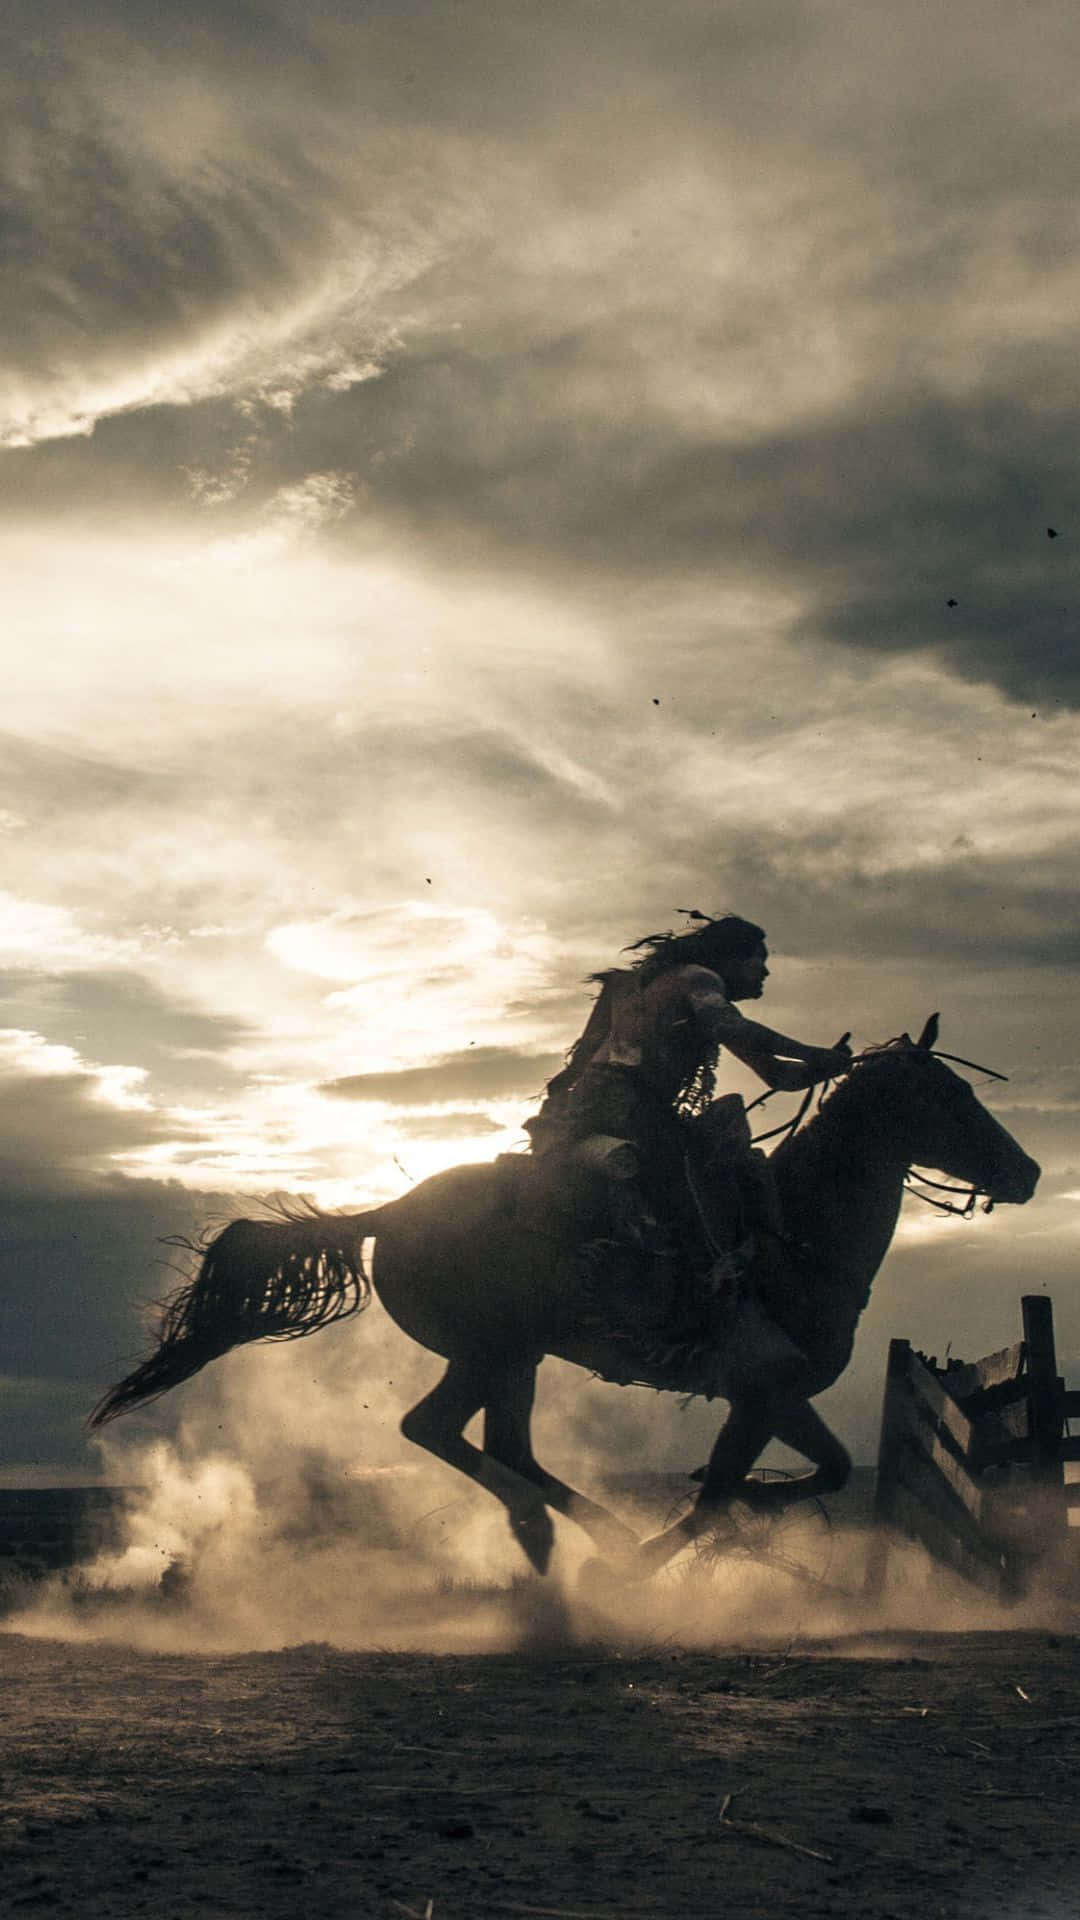 - "Ride into the Wild West with your Cowboy Iphone" Wallpaper